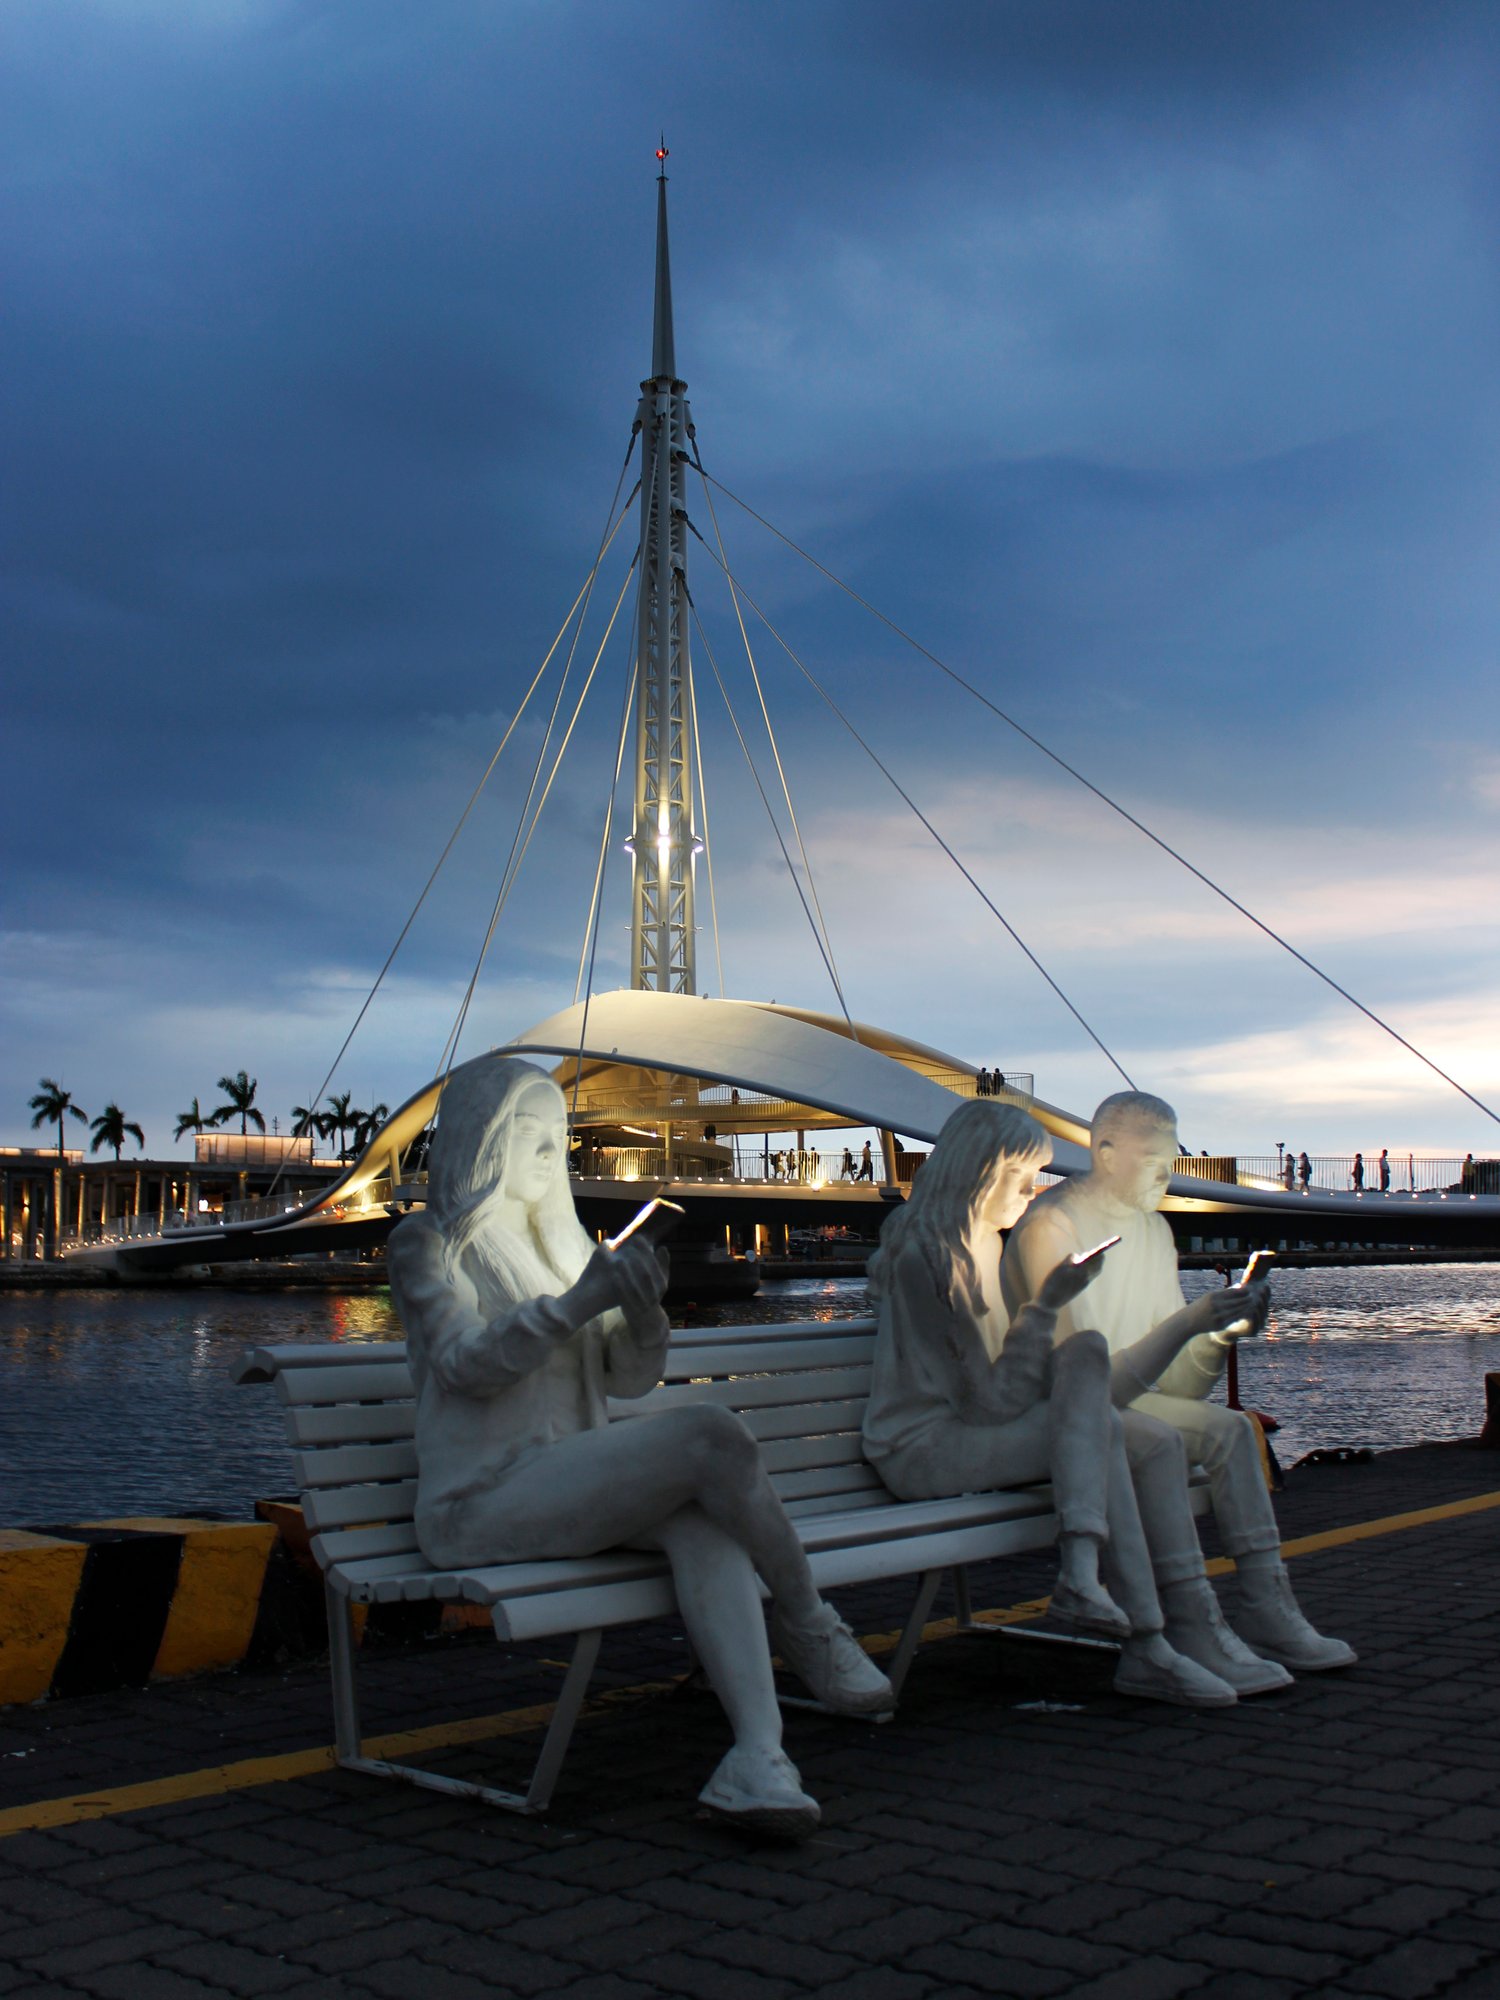 "Absorbed By Light" Statues At The Love River Bay Site, Kaohsiung